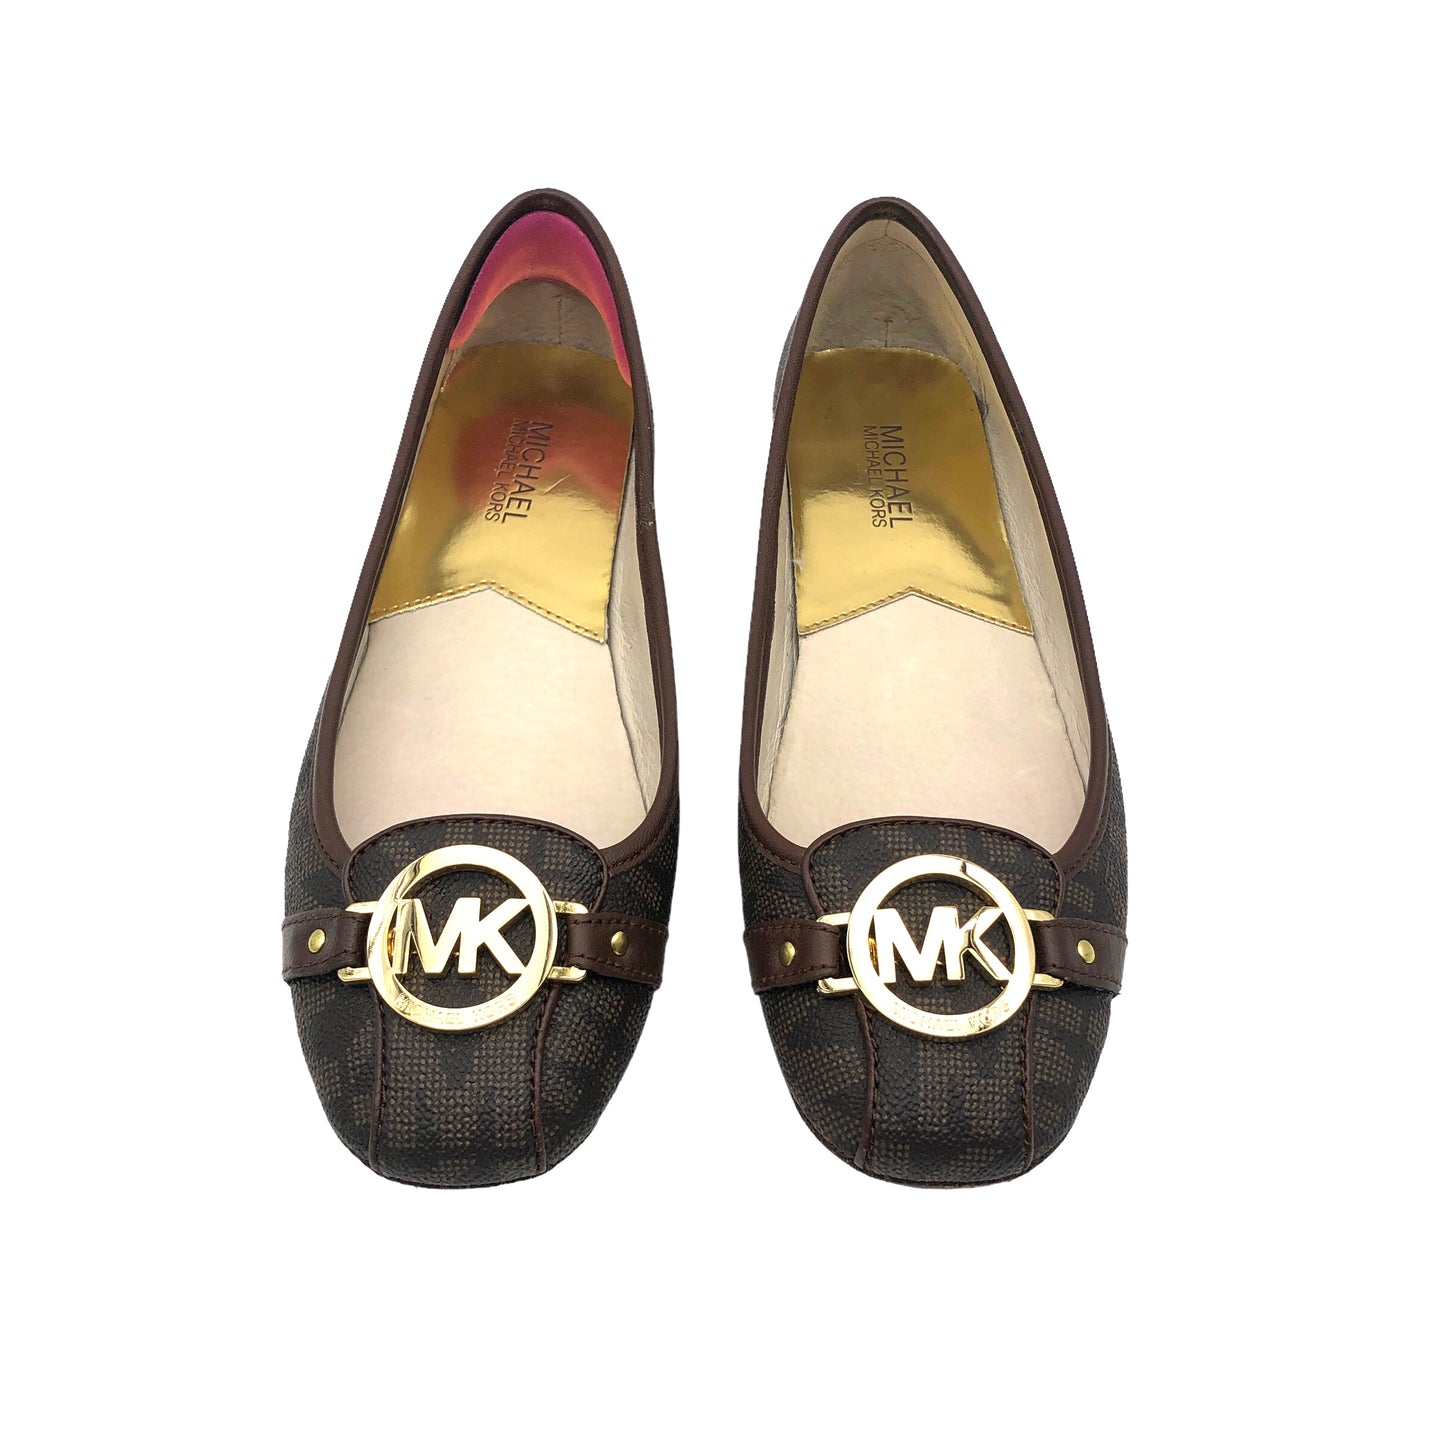 Shoes Flats By Michael Kors  Size: 9.5